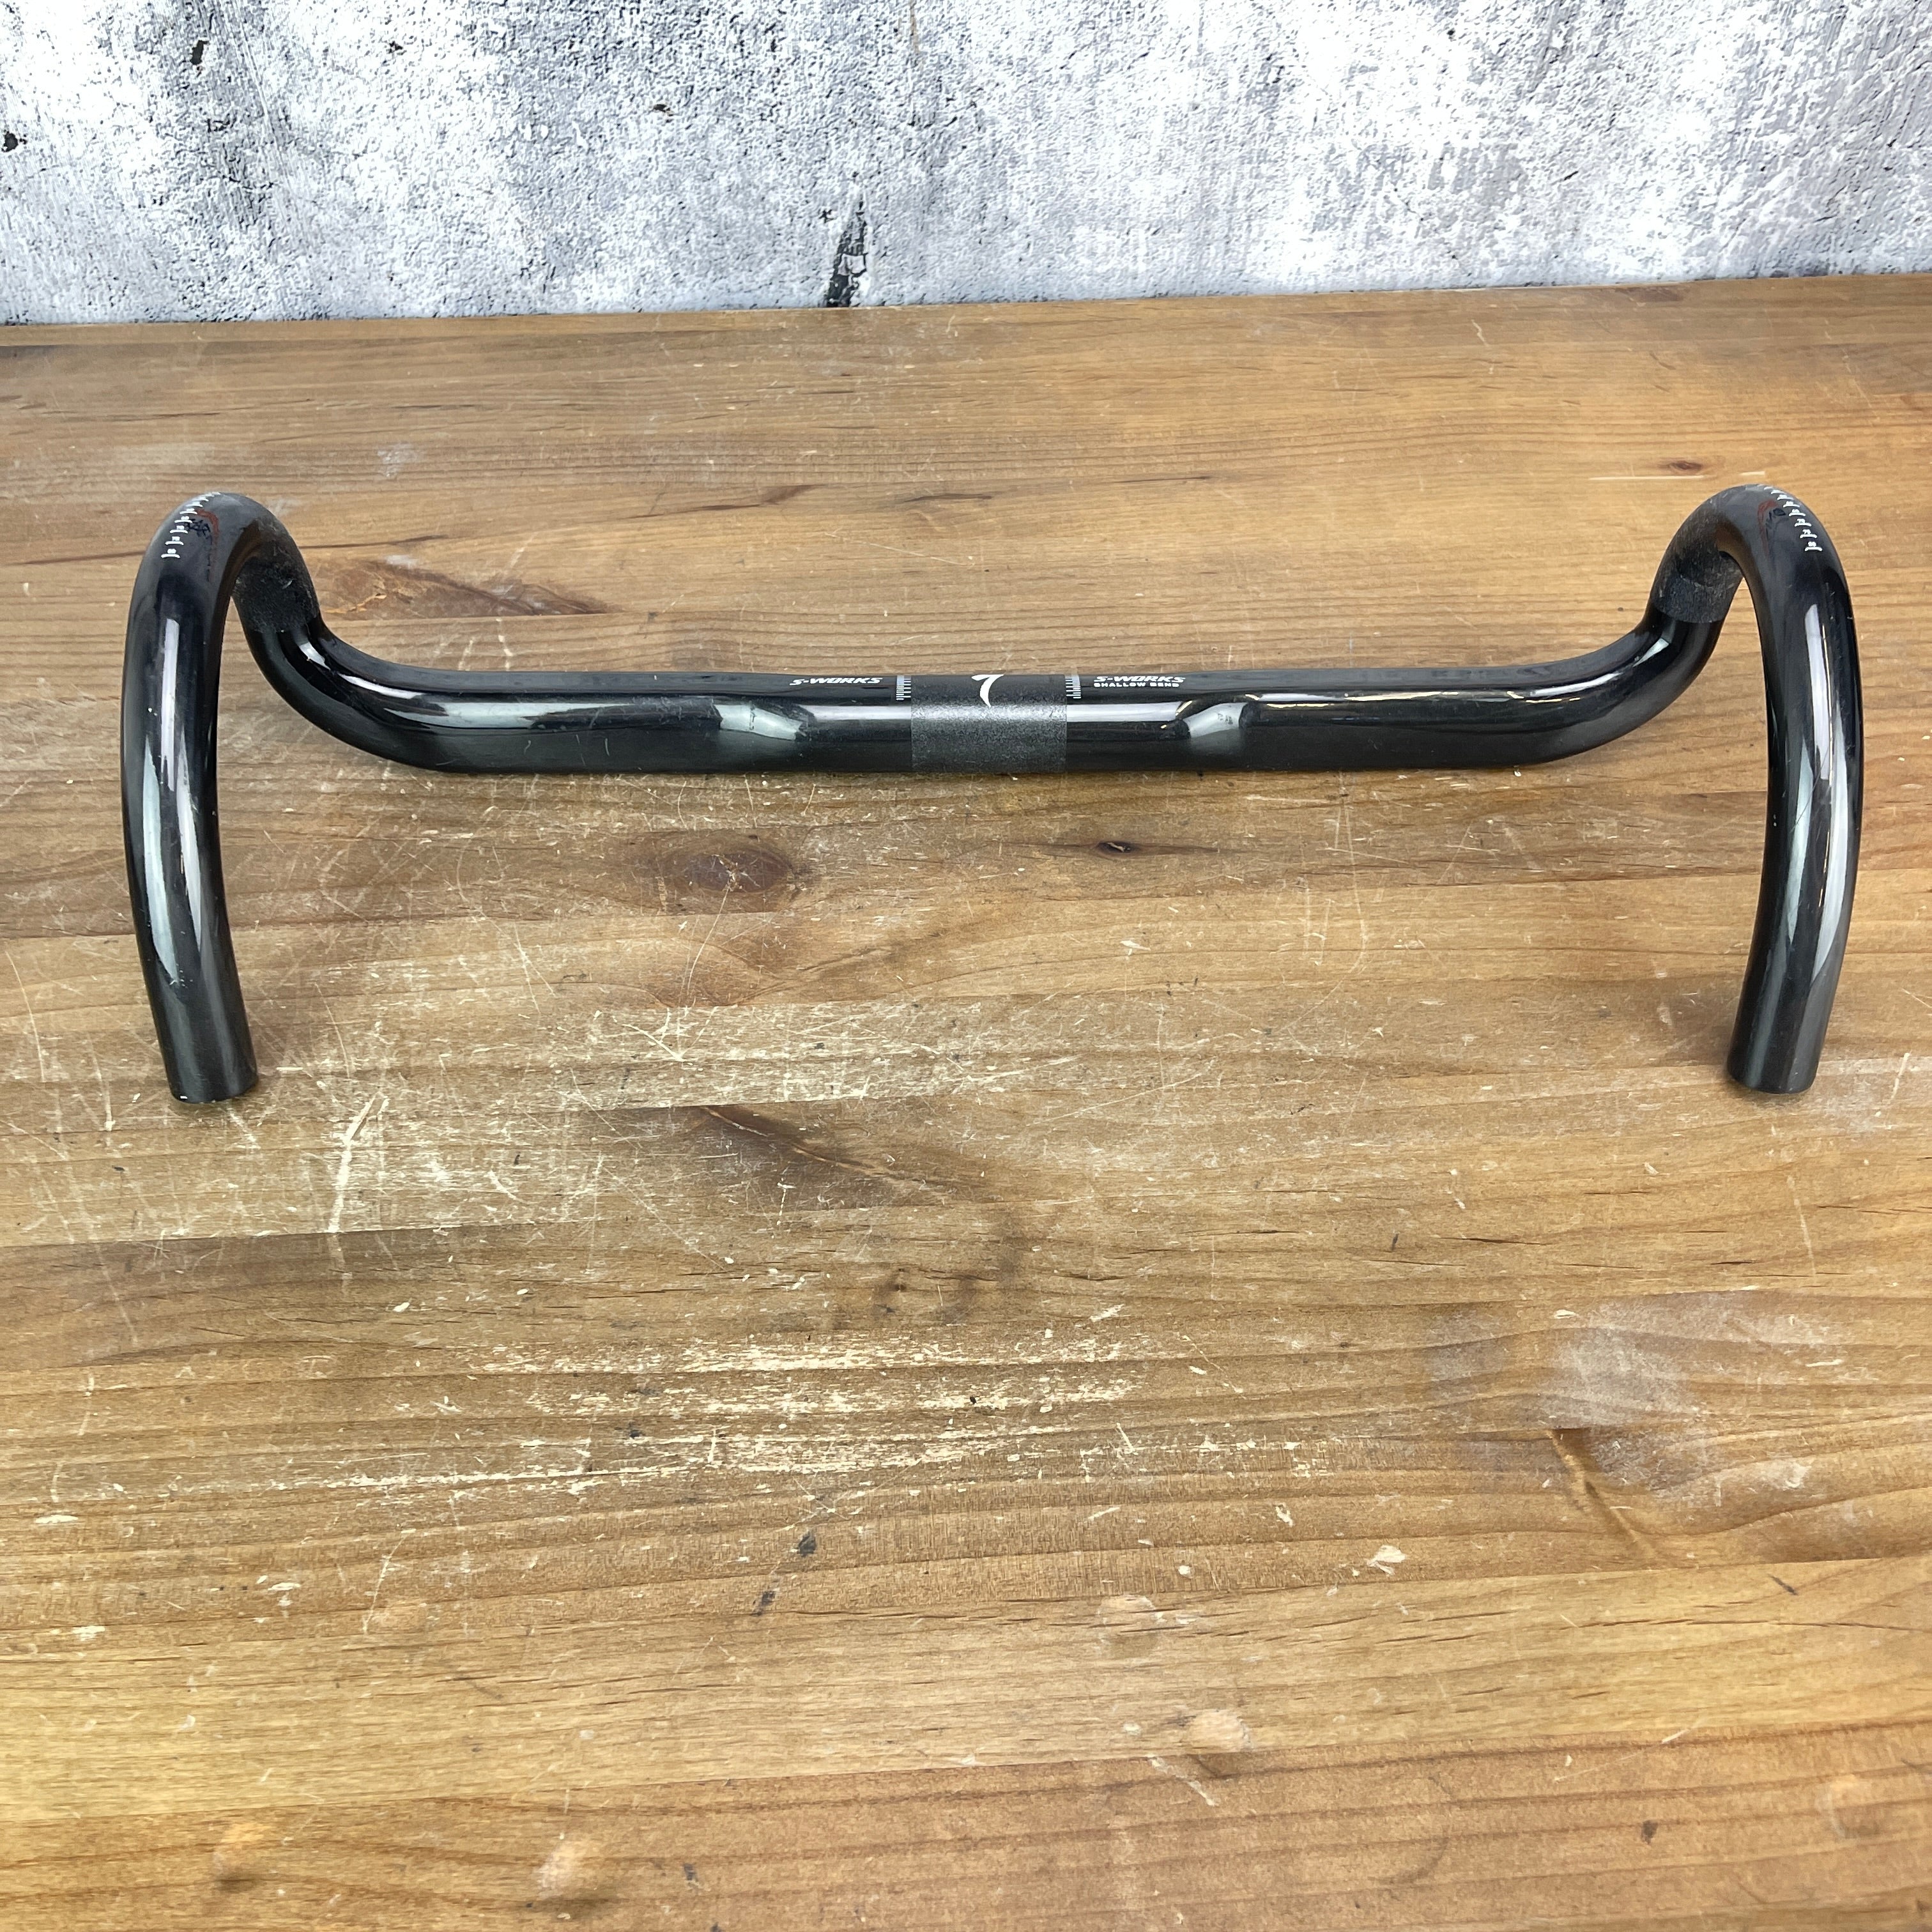 S-works Roval Rapide Handlebar, carbon42